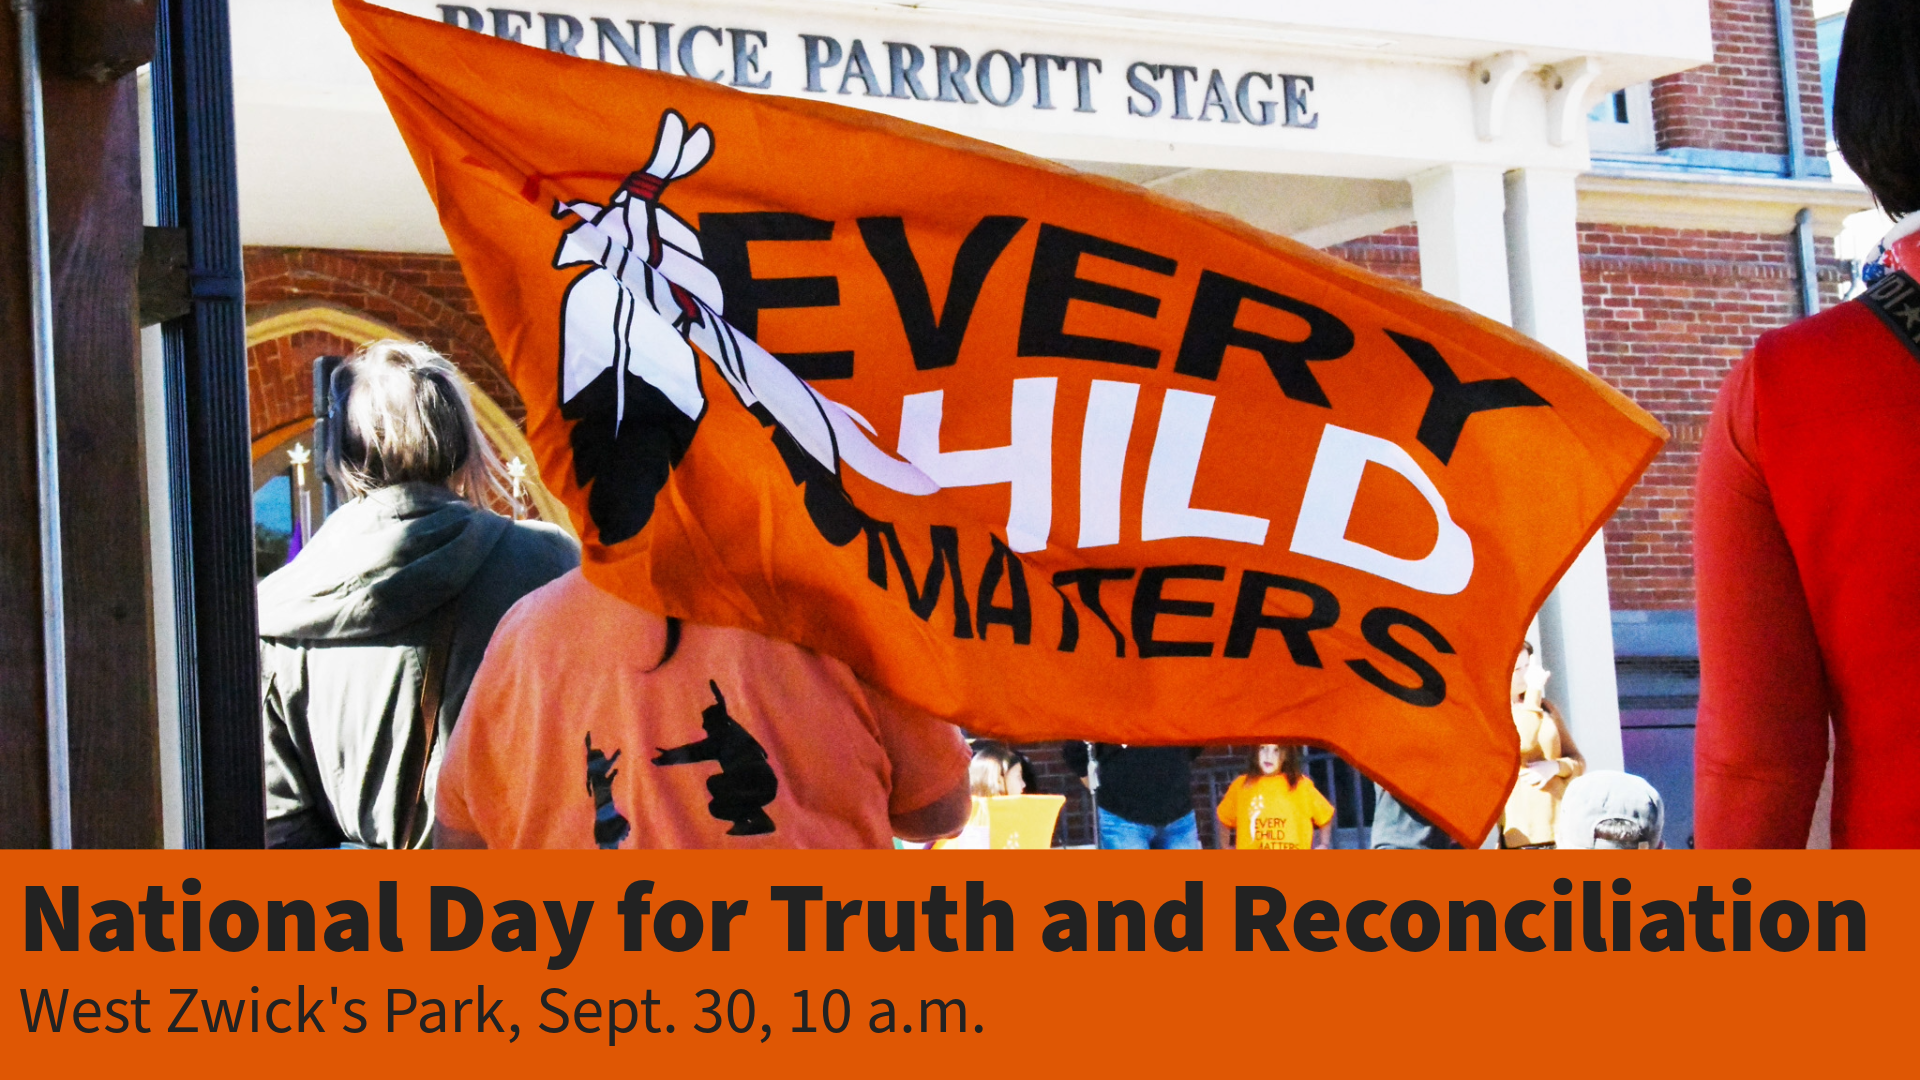 Graphic for the National Day for Truth and Reconciliation Day event on Sept. 30 at 10 a.m. in West Zwick's Park.